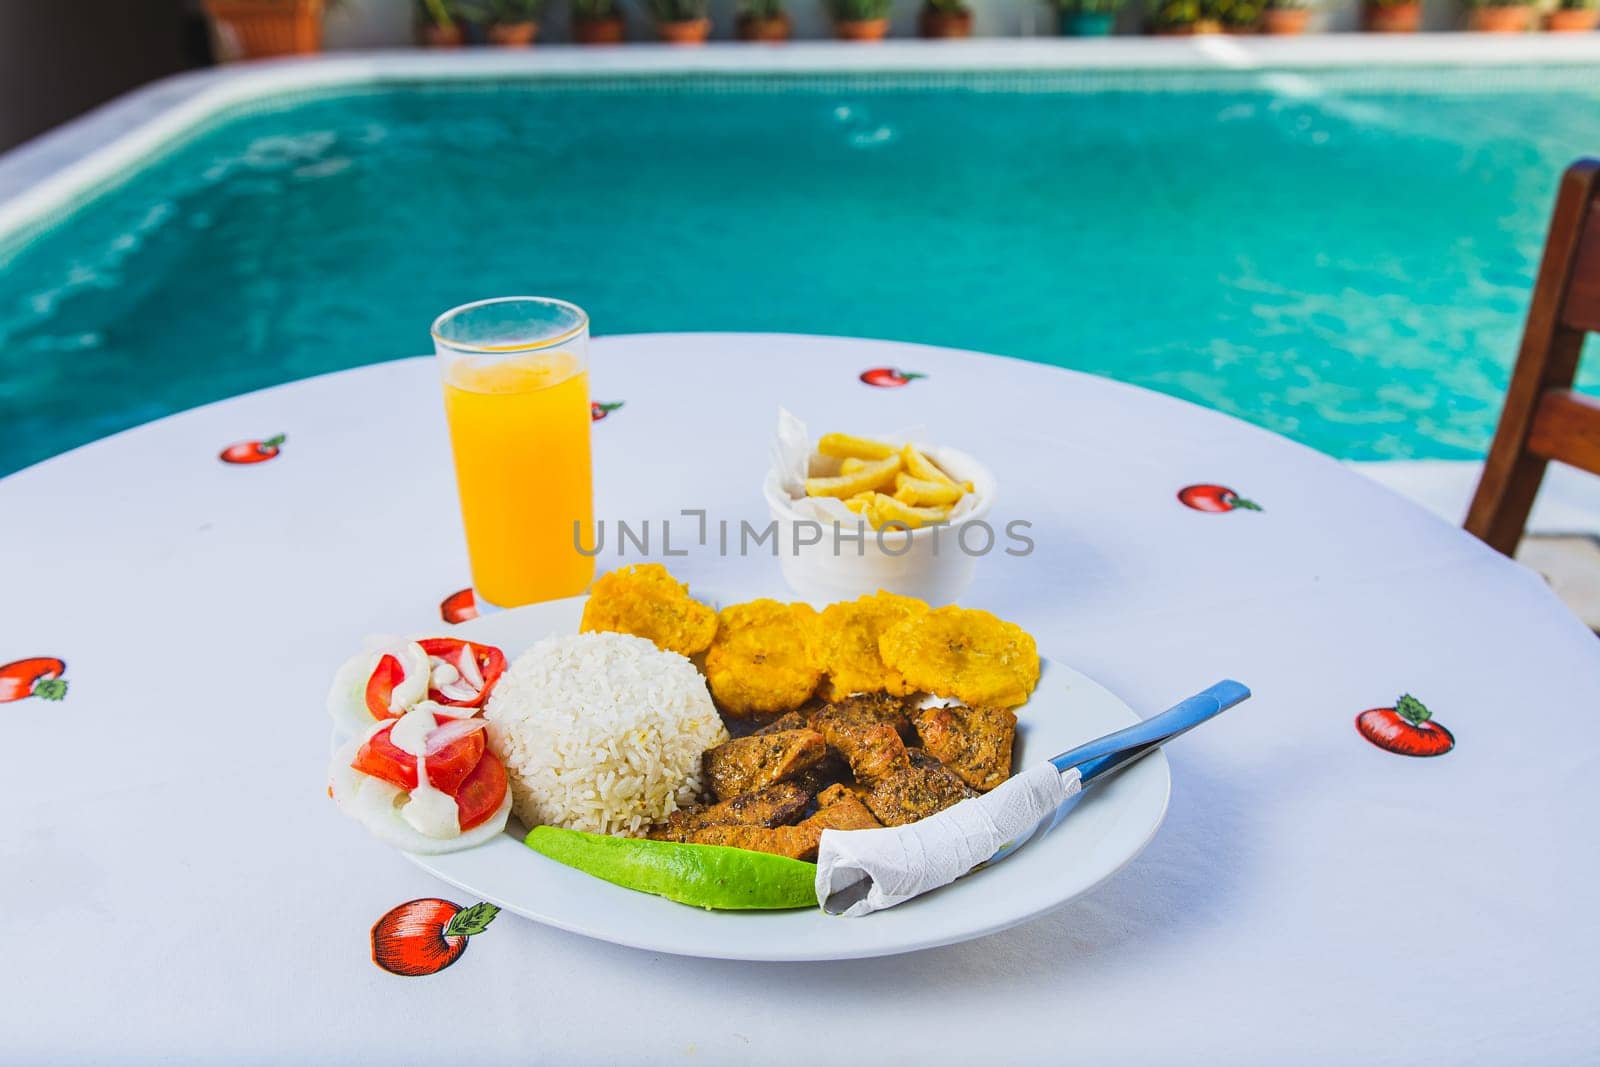 Delicious breakfast near a crystal clear pool. Traditional breakfast with orange juice served near a swimming pool by isaiphoto